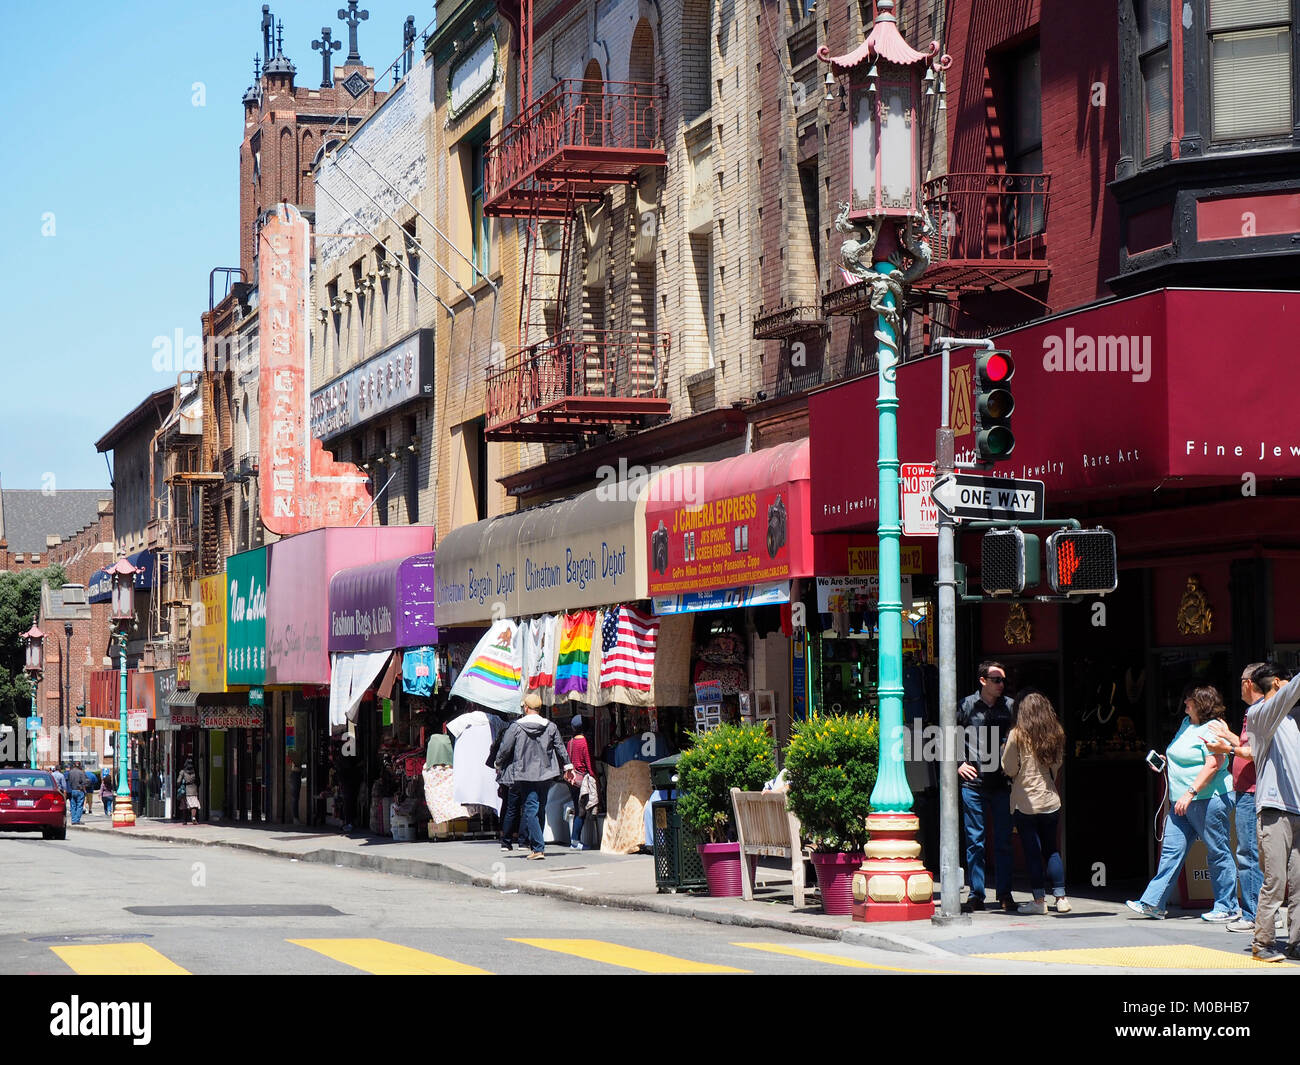 San Francisco , CA - 17 Aug 2016: Busy shops and small businesses on Grant Ave/Pine St., between San Francisco's Chinatown and the Financial District. Stock Photo